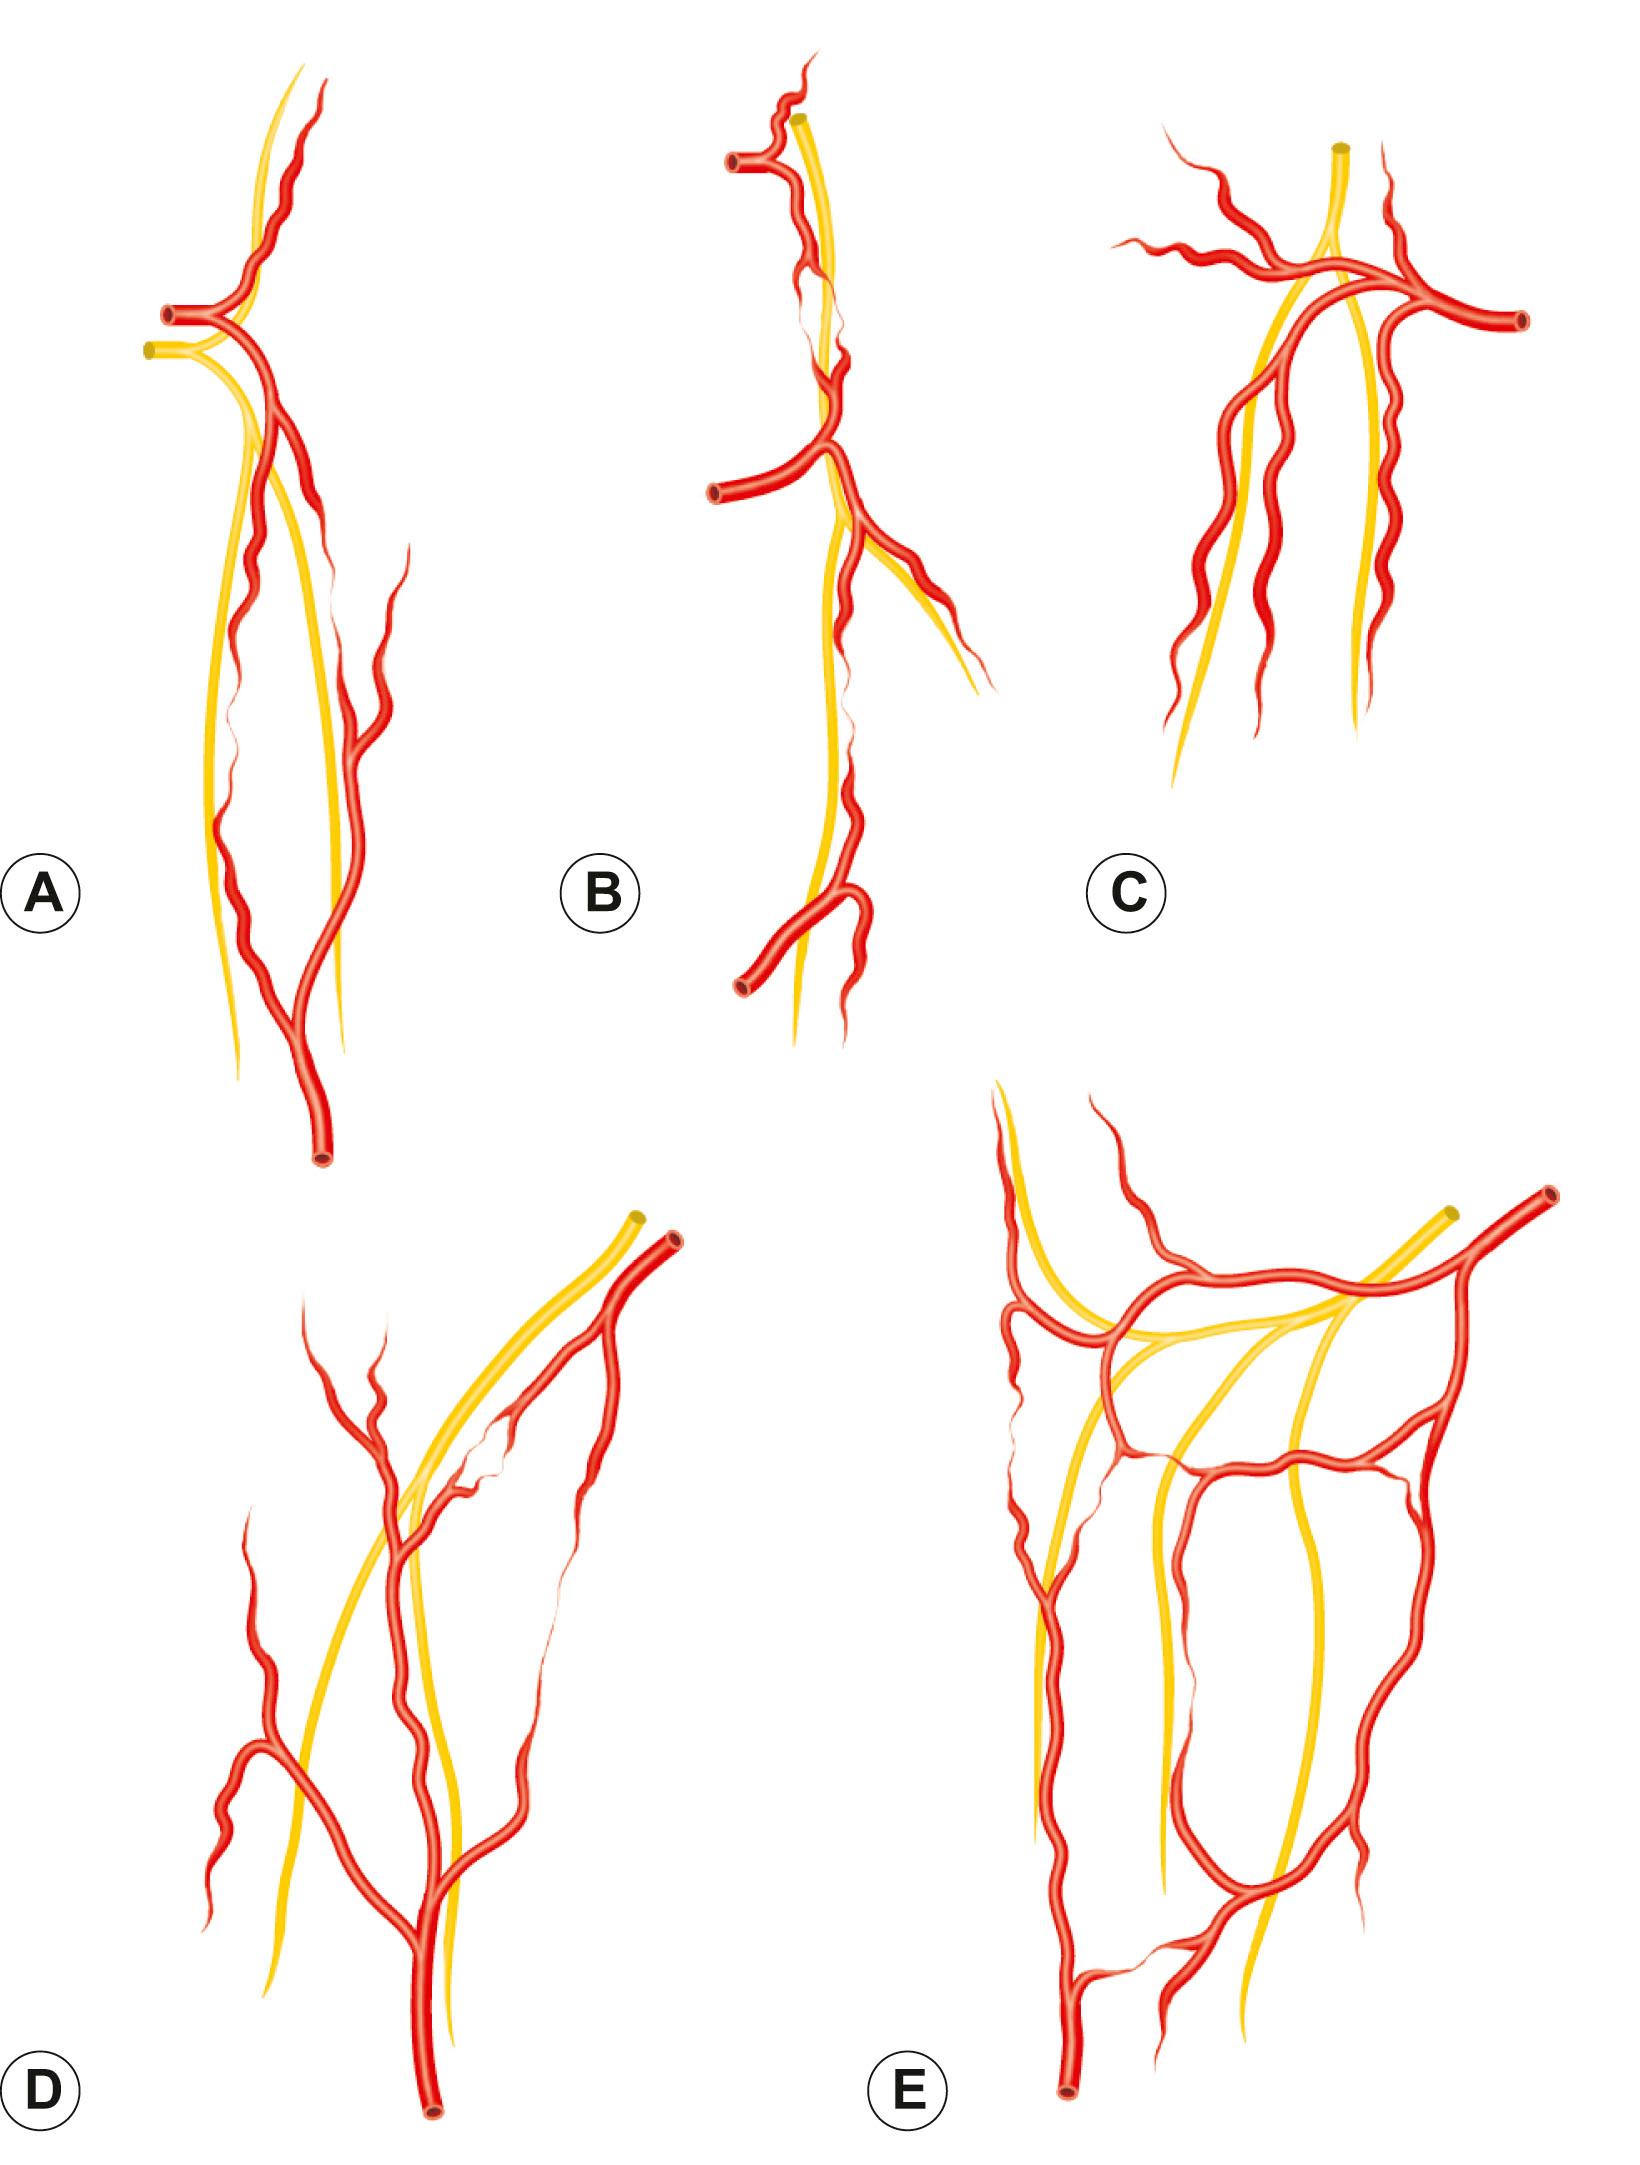 Figure 23.15, The neurovascular patterns found in the integument. (A) A long artery connected to its neighbor by a true anastomosis courses with the nerve. (B) A chain-linked system of arteries hitchhikes with the nerve. (C) The nerve and artery pierce the deep fascia at separate sites. Branches of the vessel peel off to accompany the nerve as it crosses the main arterial trunk. (D) The nerve at first courses parallel to an artery and then approaches the neighboring artery from its periphery to descend along its branches toward the main trunk. (E) The nerve crosses the primary and secondary arcades of the artery before coursing parallel to the vascular network.